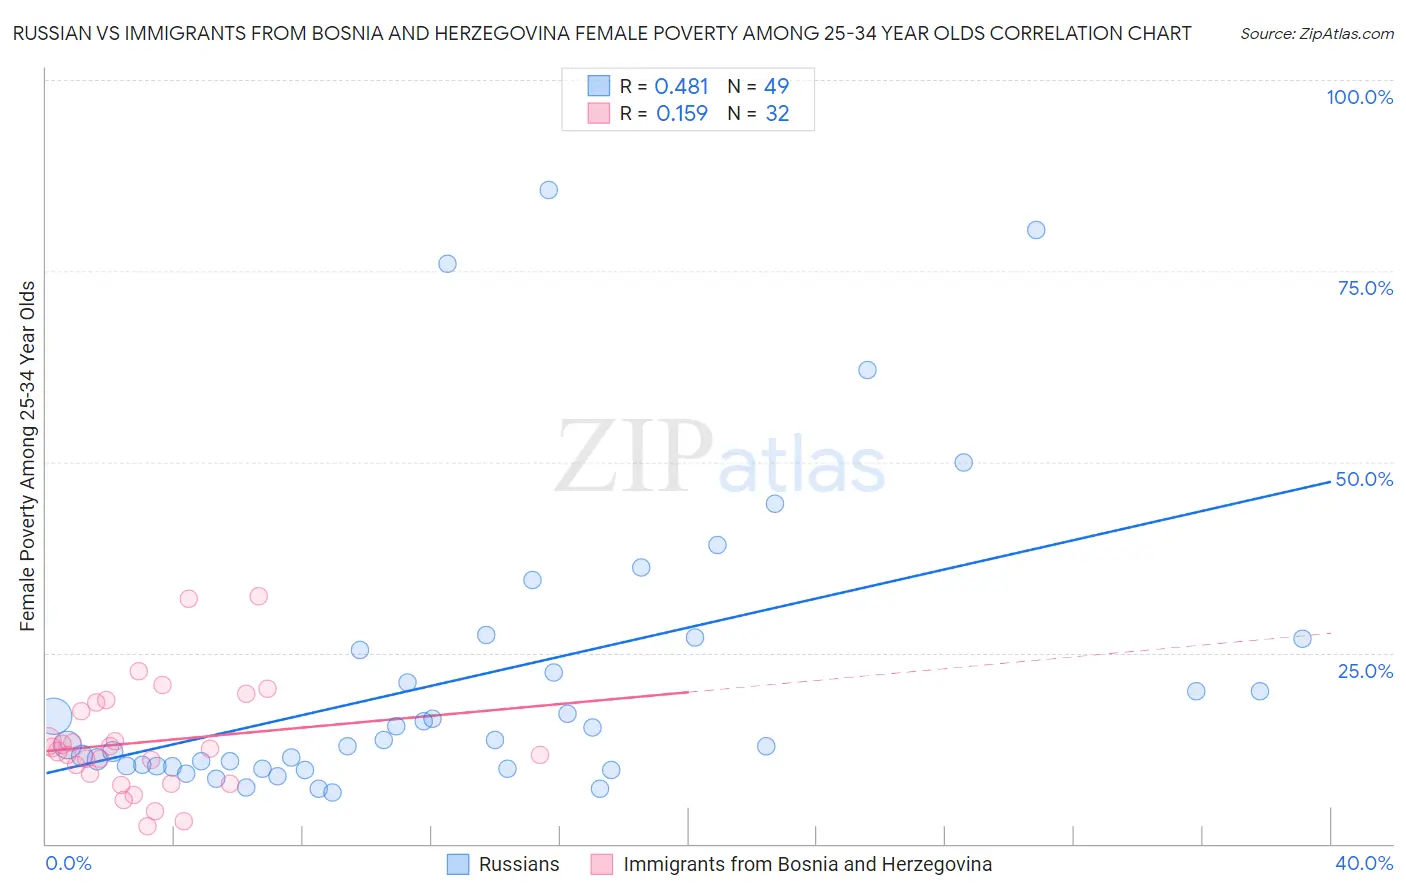 Russian vs Immigrants from Bosnia and Herzegovina Female Poverty Among 25-34 Year Olds